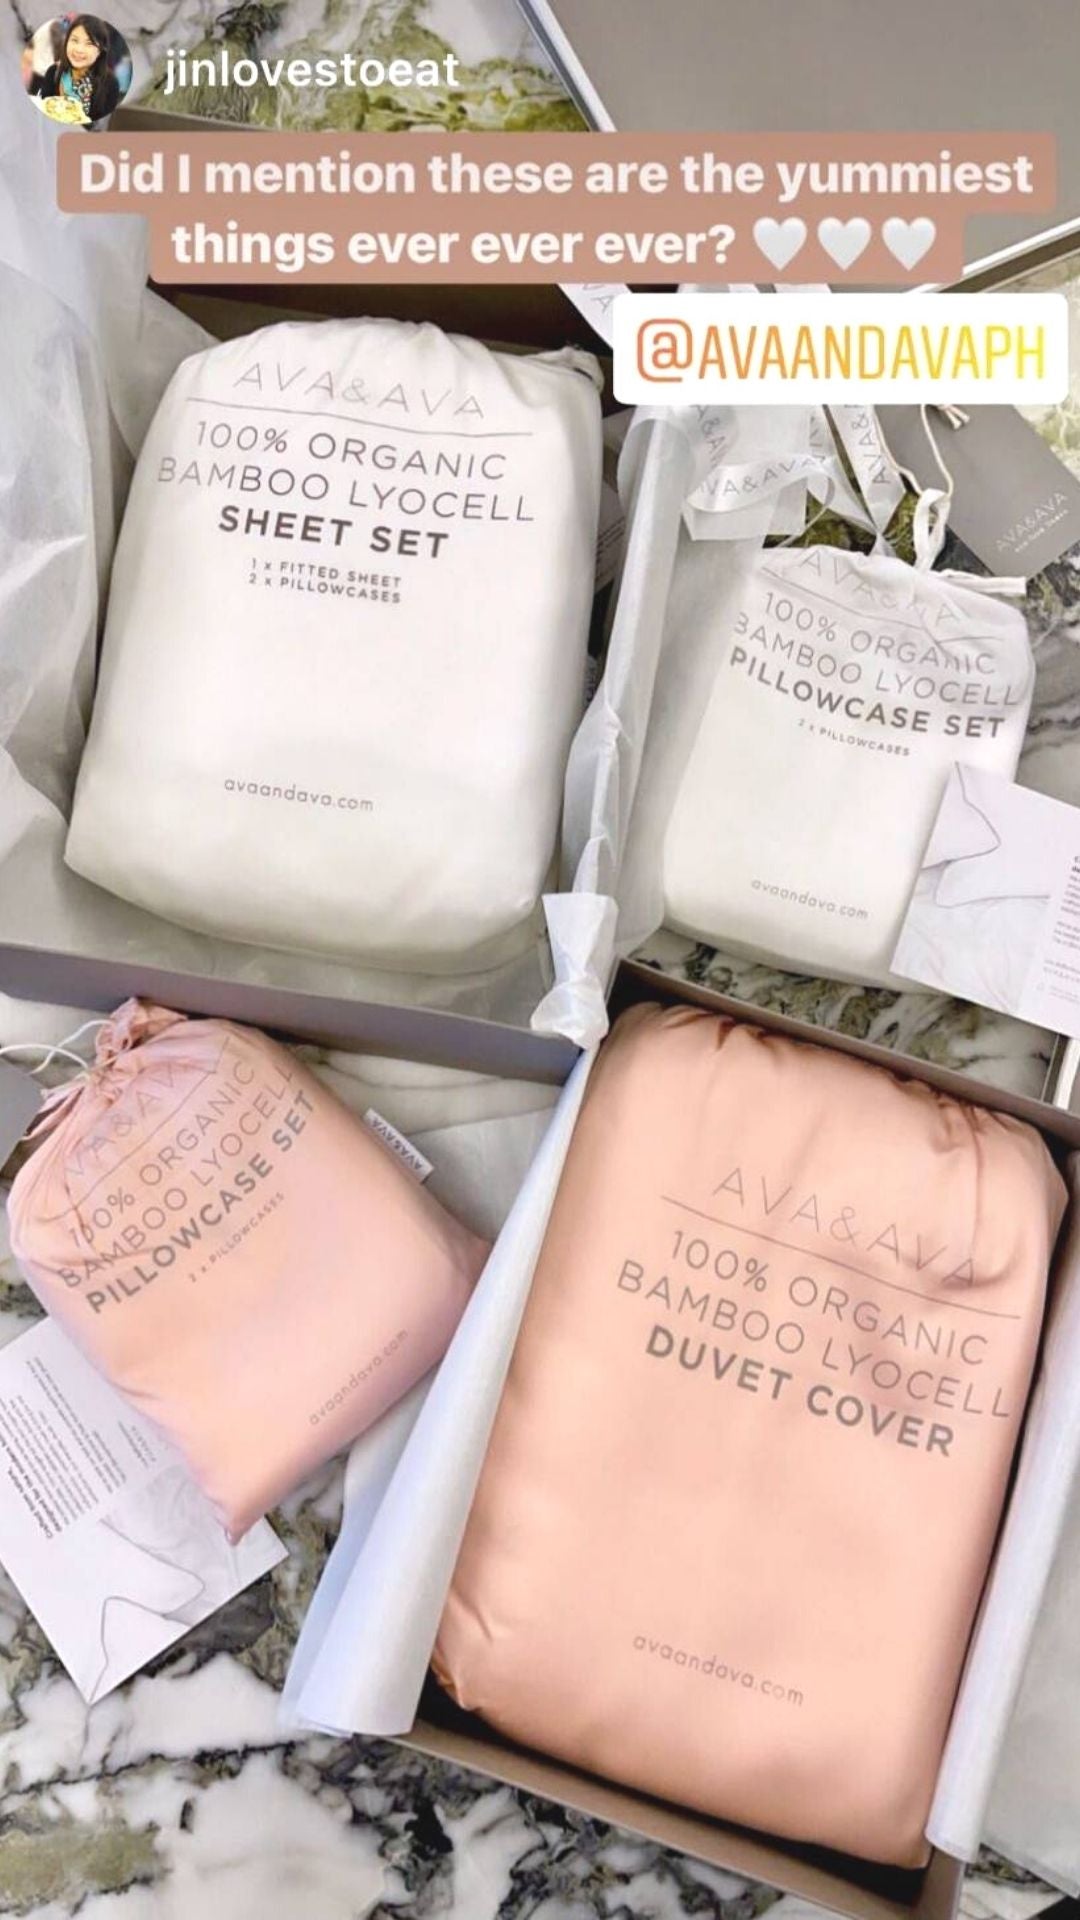 ava and ava buttery silky soft organic bamboo lyocell bedding set in white and pink in gray gift box packaging